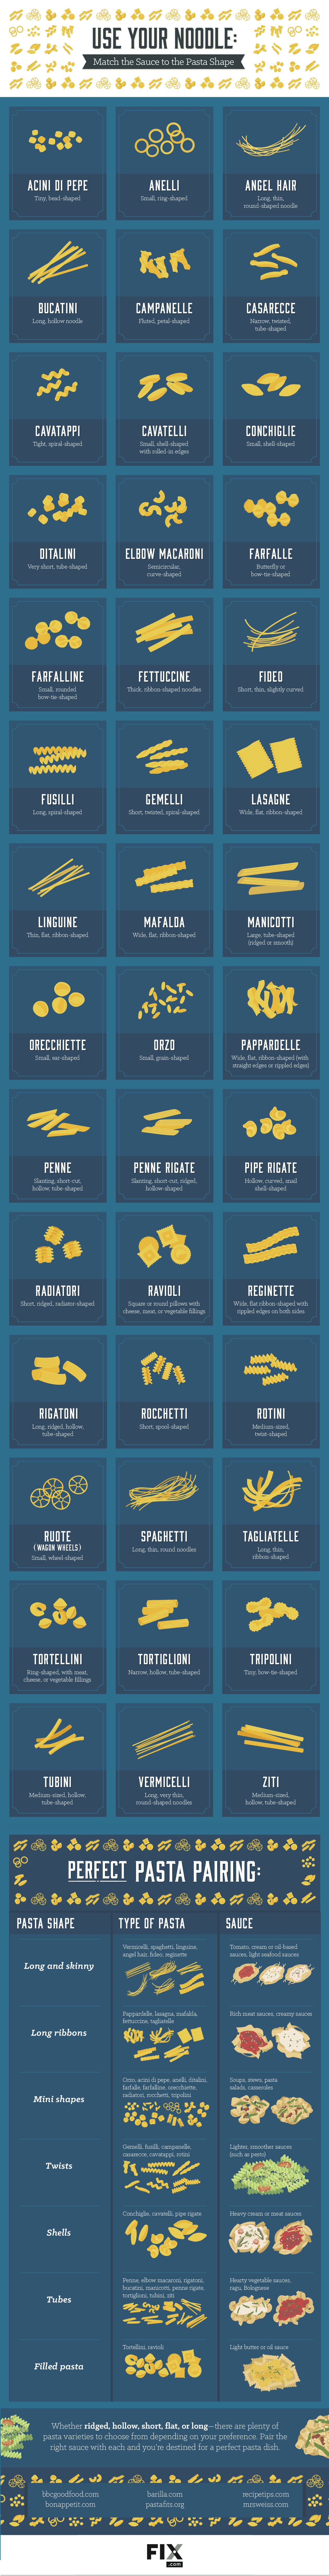 The Perfect Sauces for Each Type of Pasta